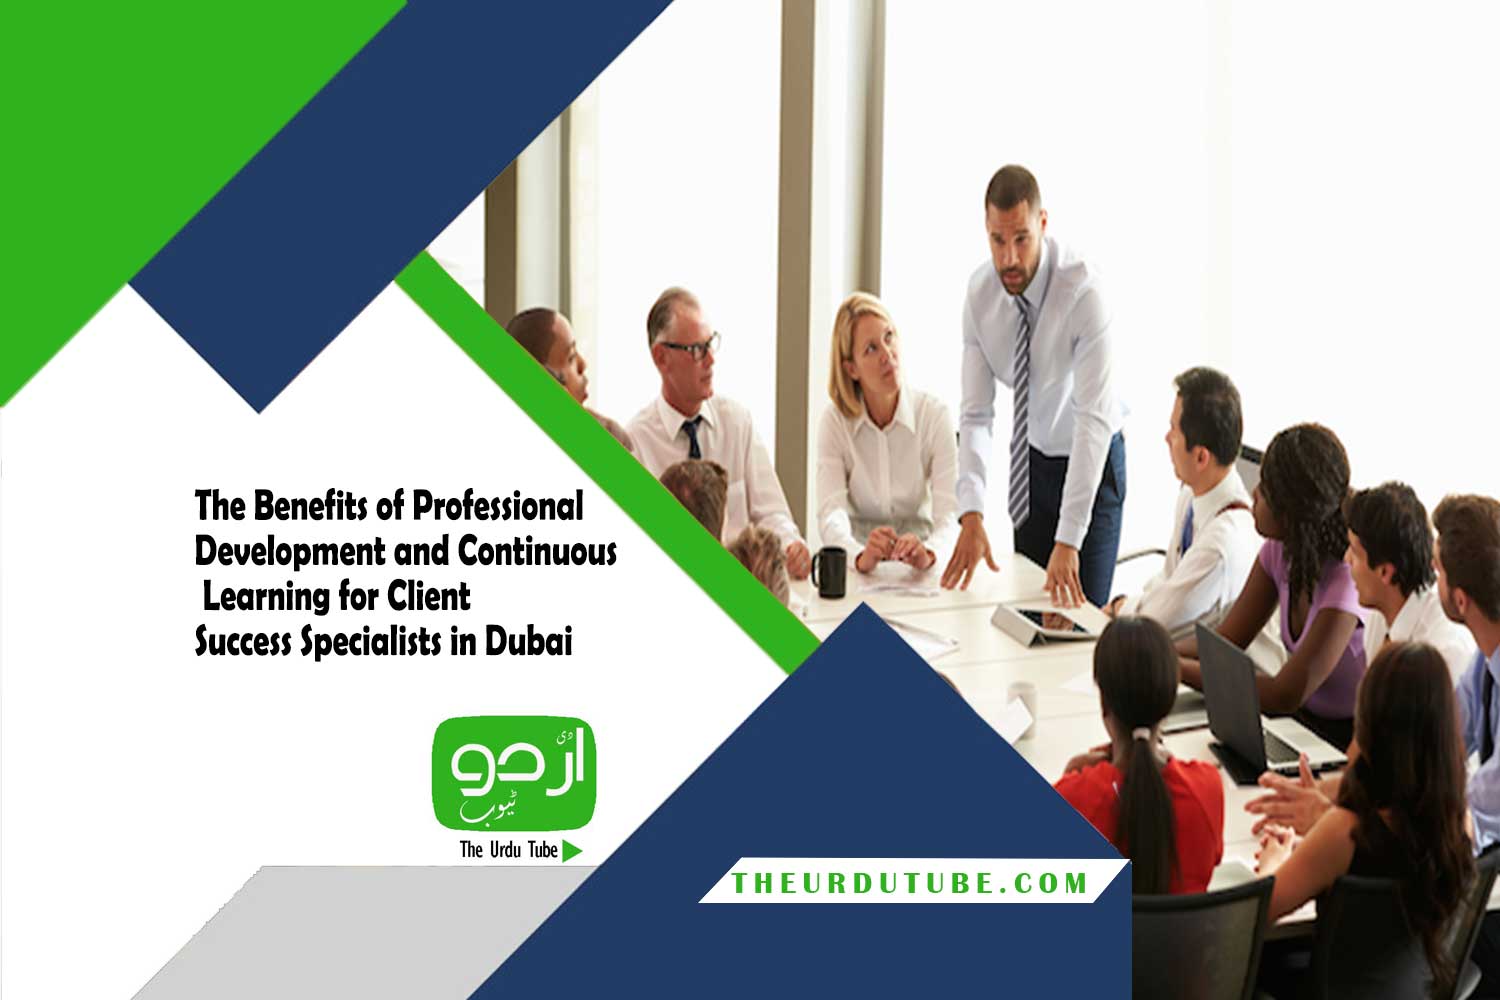 The Benefits of Professional Development and Continuous Learning for Client Success Specialists in Dubai